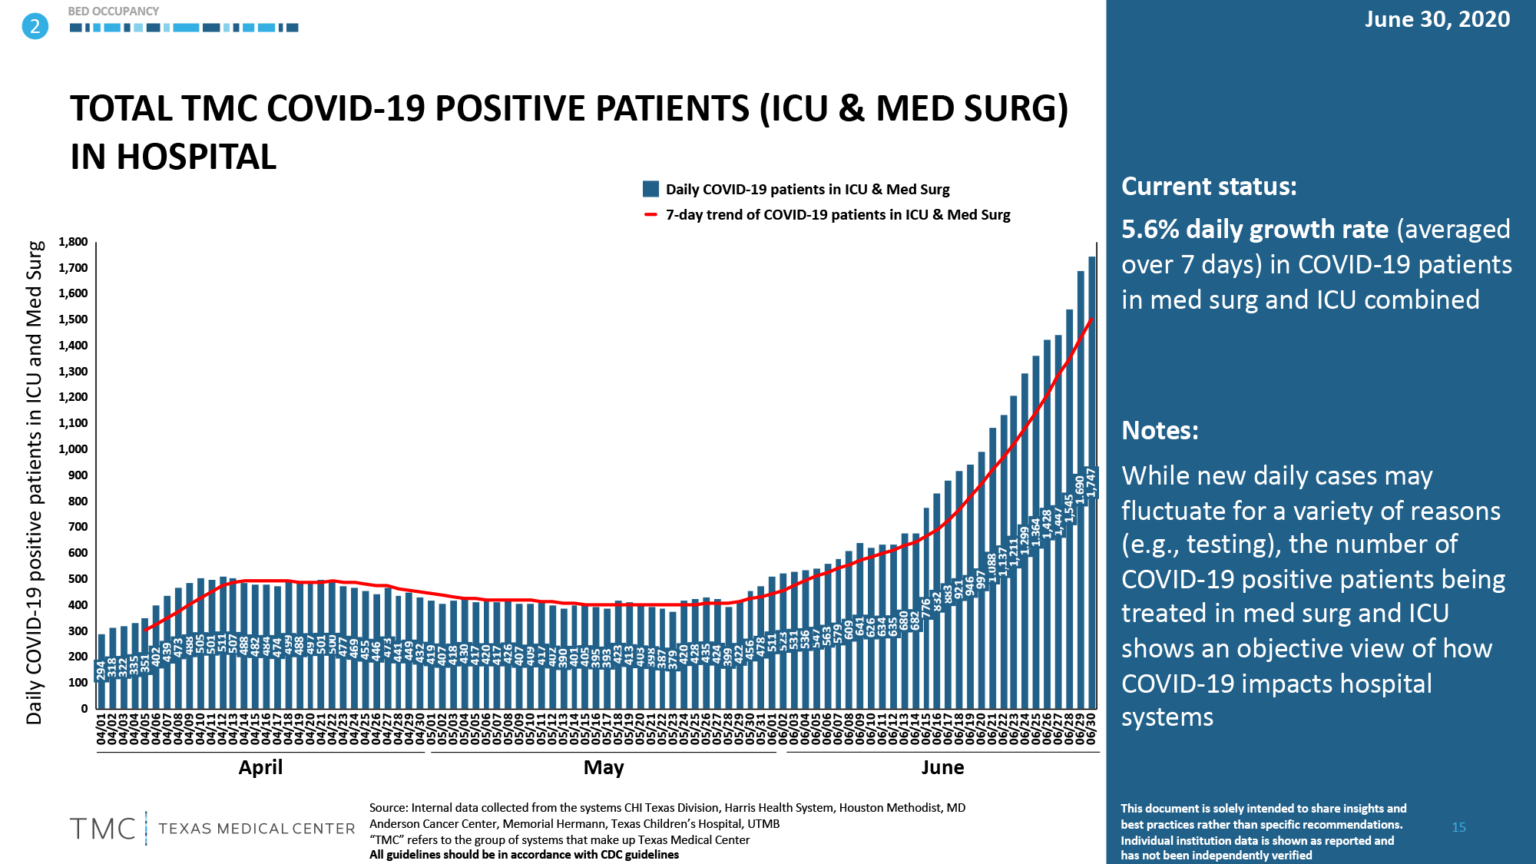 o-Total-TMC-Covid-19-Positive-Patients-ICU-Med-Surg-In-Hospital-7-1-2020-1536x864.png